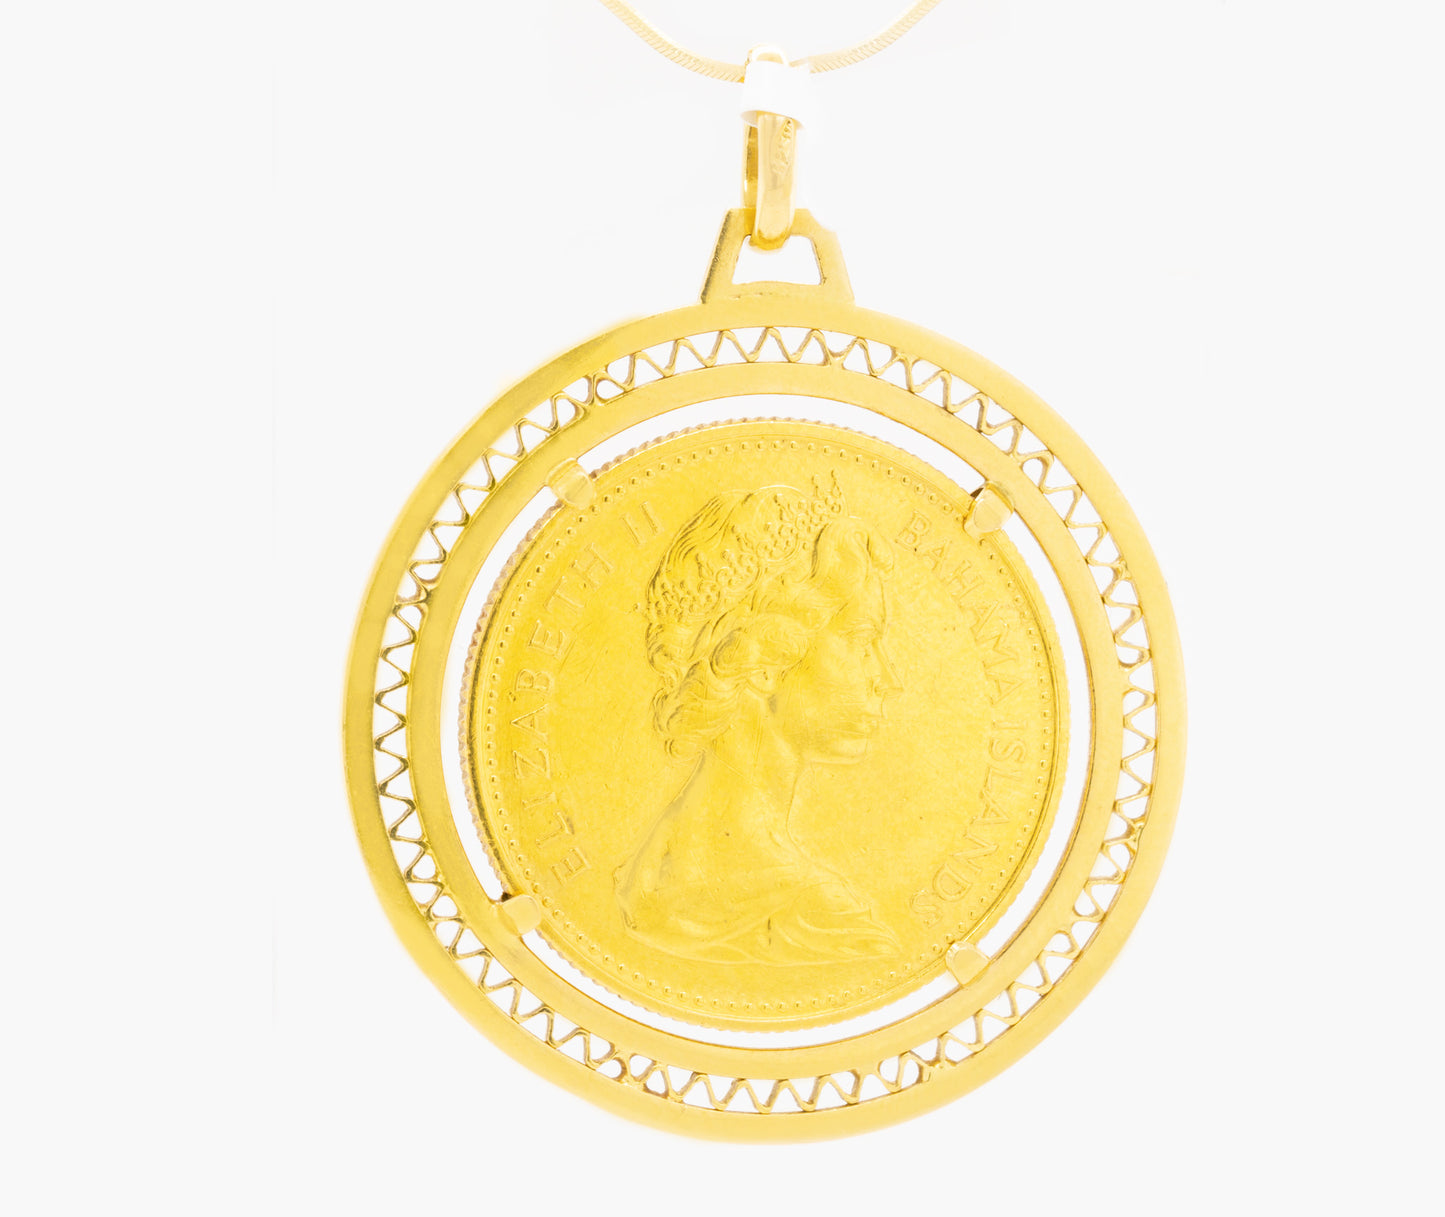 $50 English Gold Piece 27 Grams Pendant 14K and 24K Gold